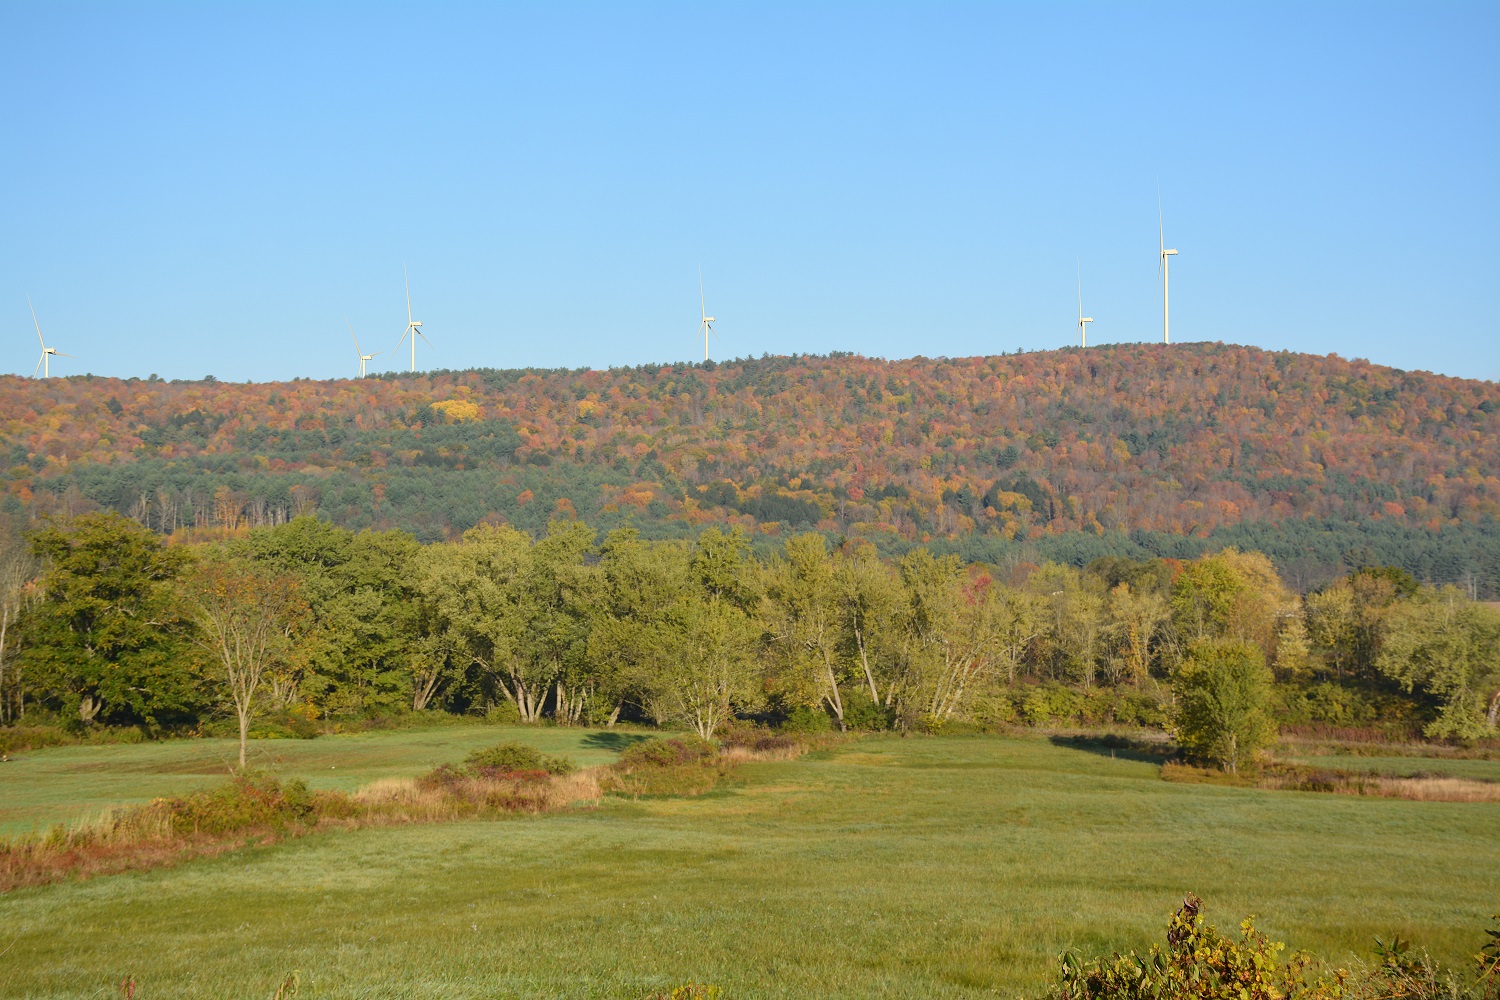 a picture of windmills in the back with hills and a field in the foreground